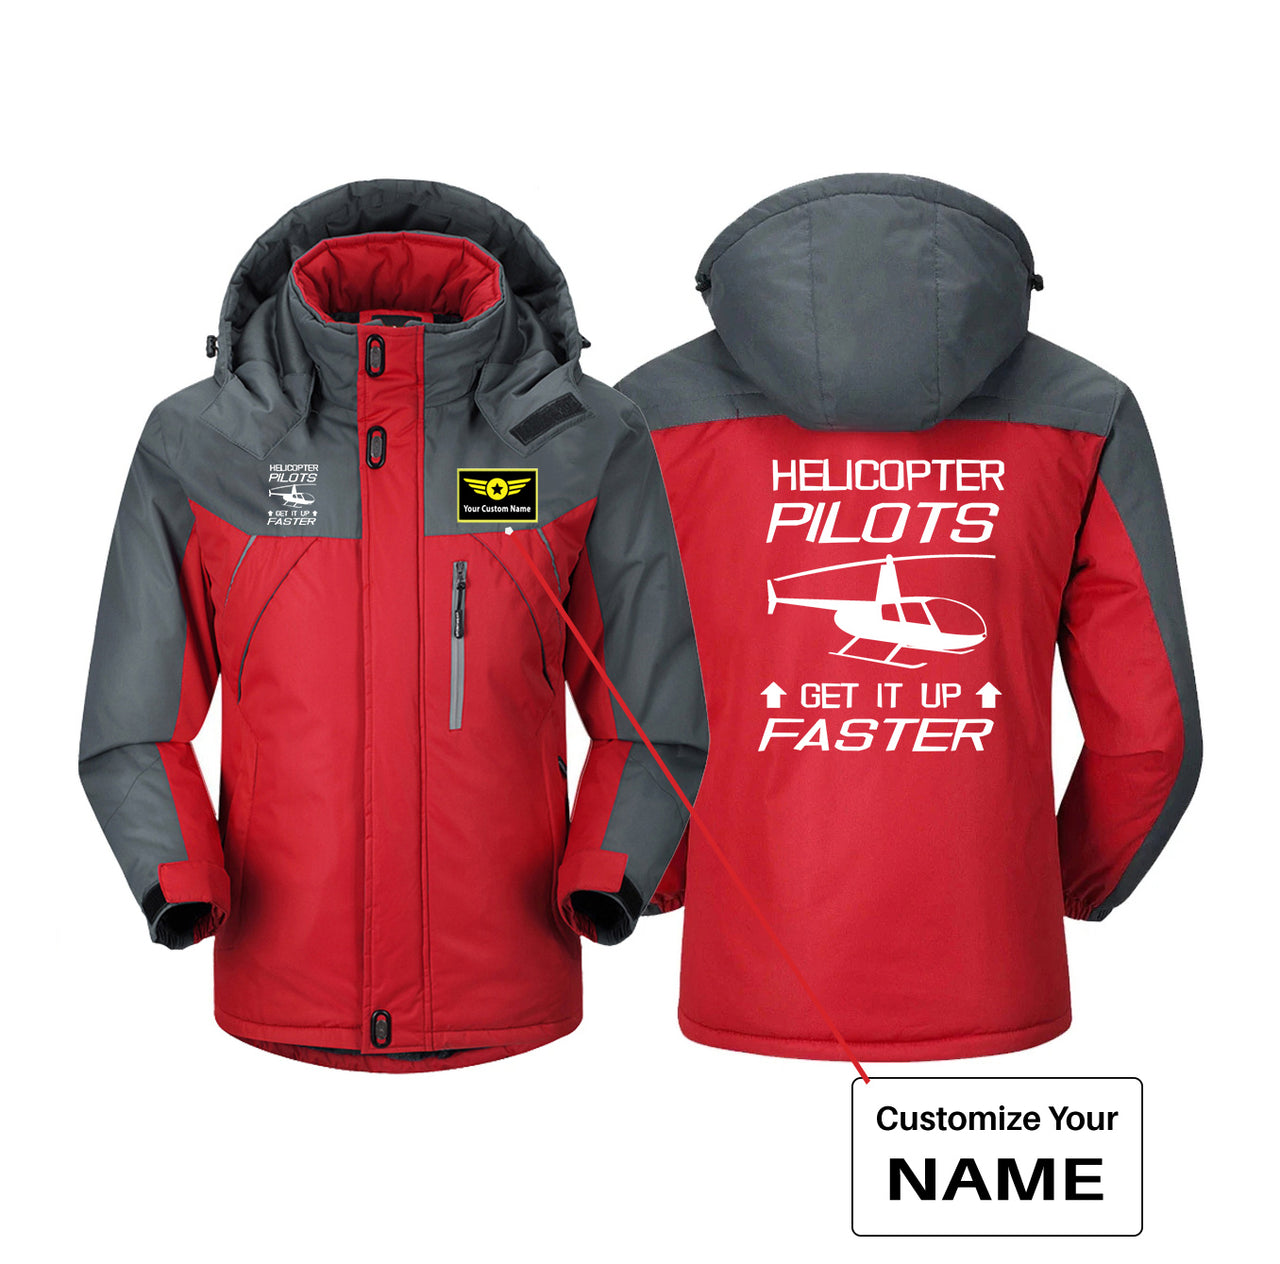 Helicopter Pilots Get It Up Faster Designed Thick Winter Jackets